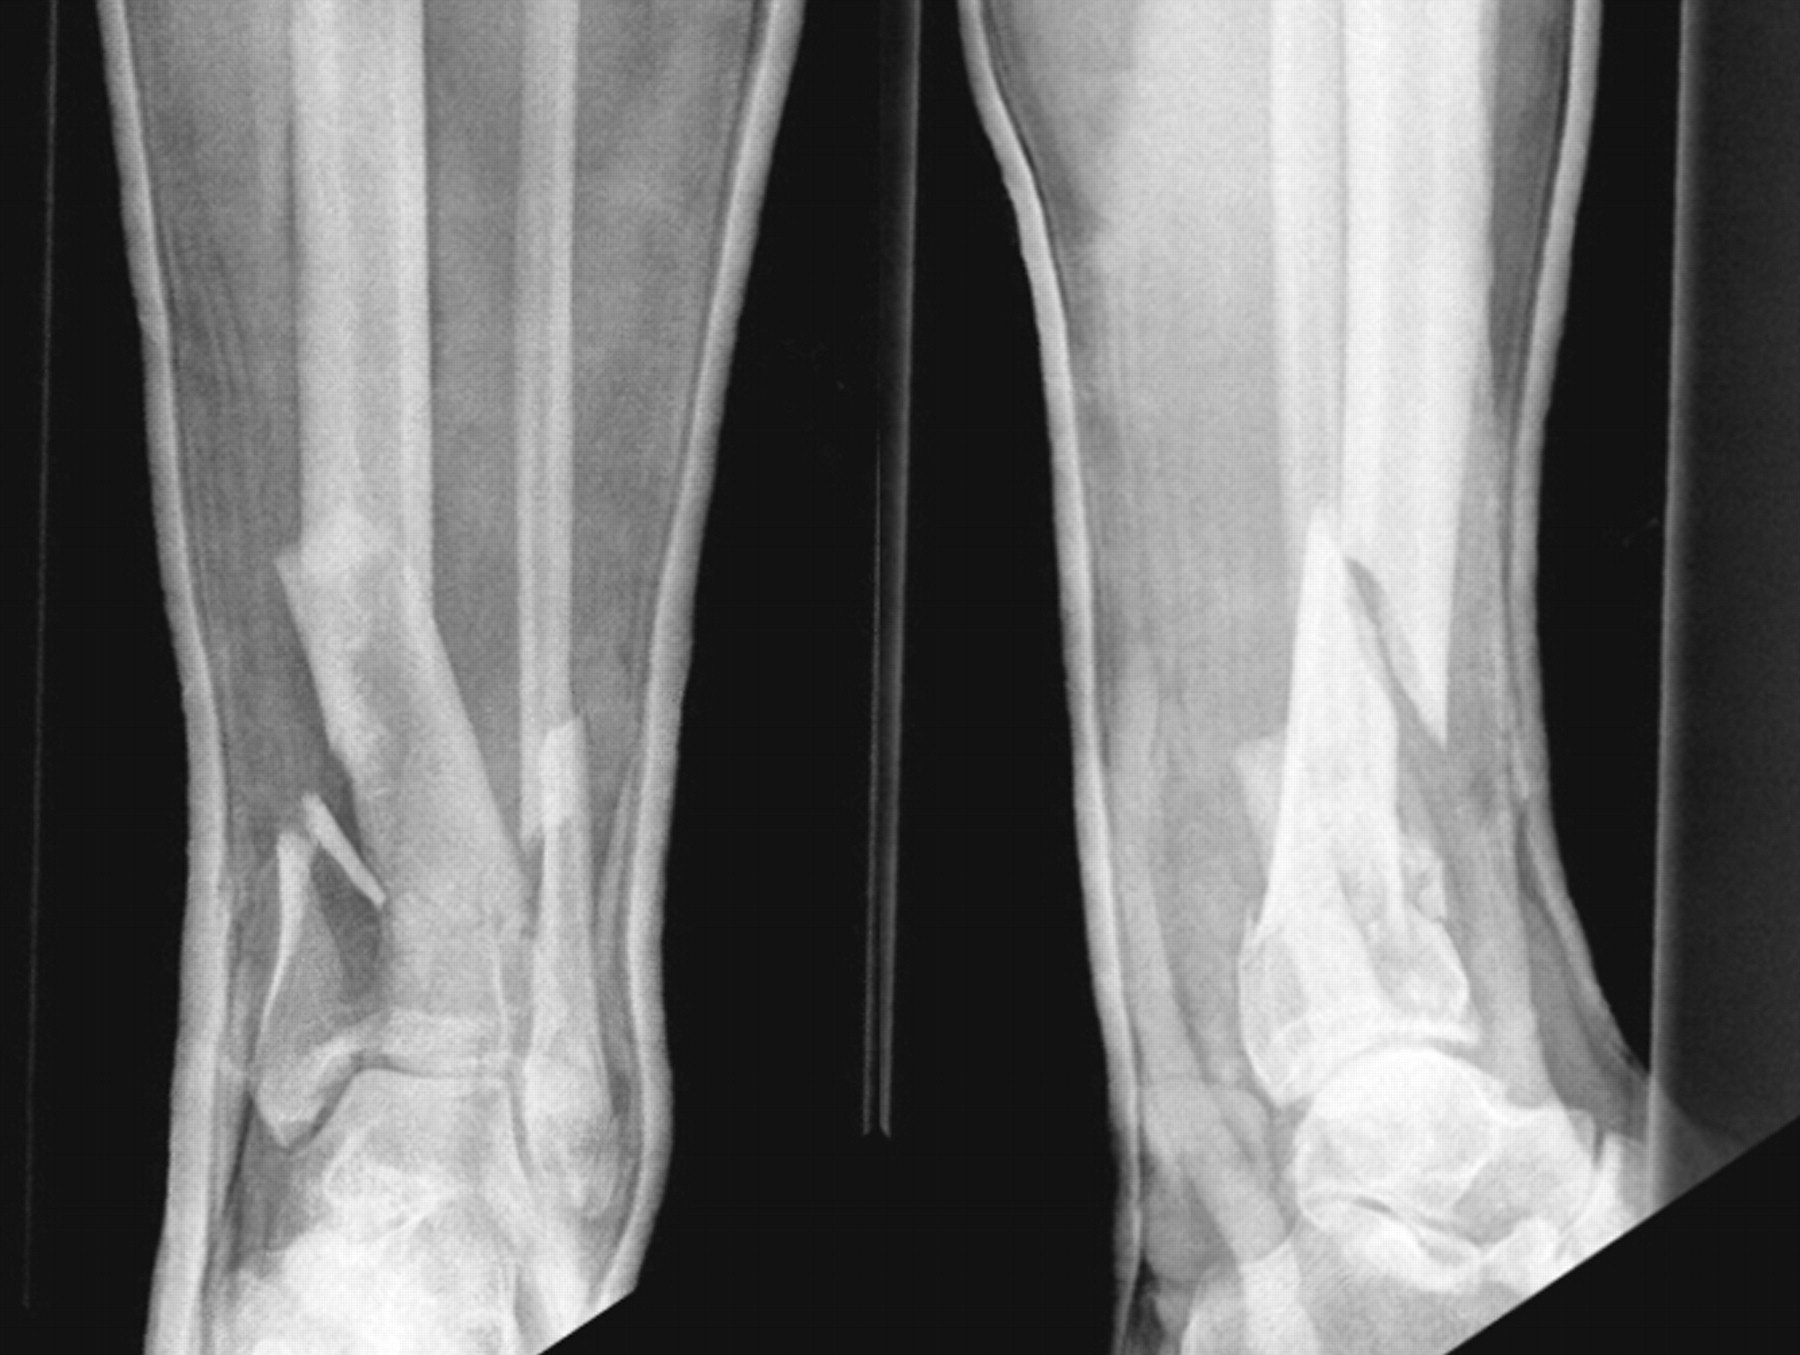 Rhbmp 7 Accelerates The Healing In Distal Tibial Fractures Treated By